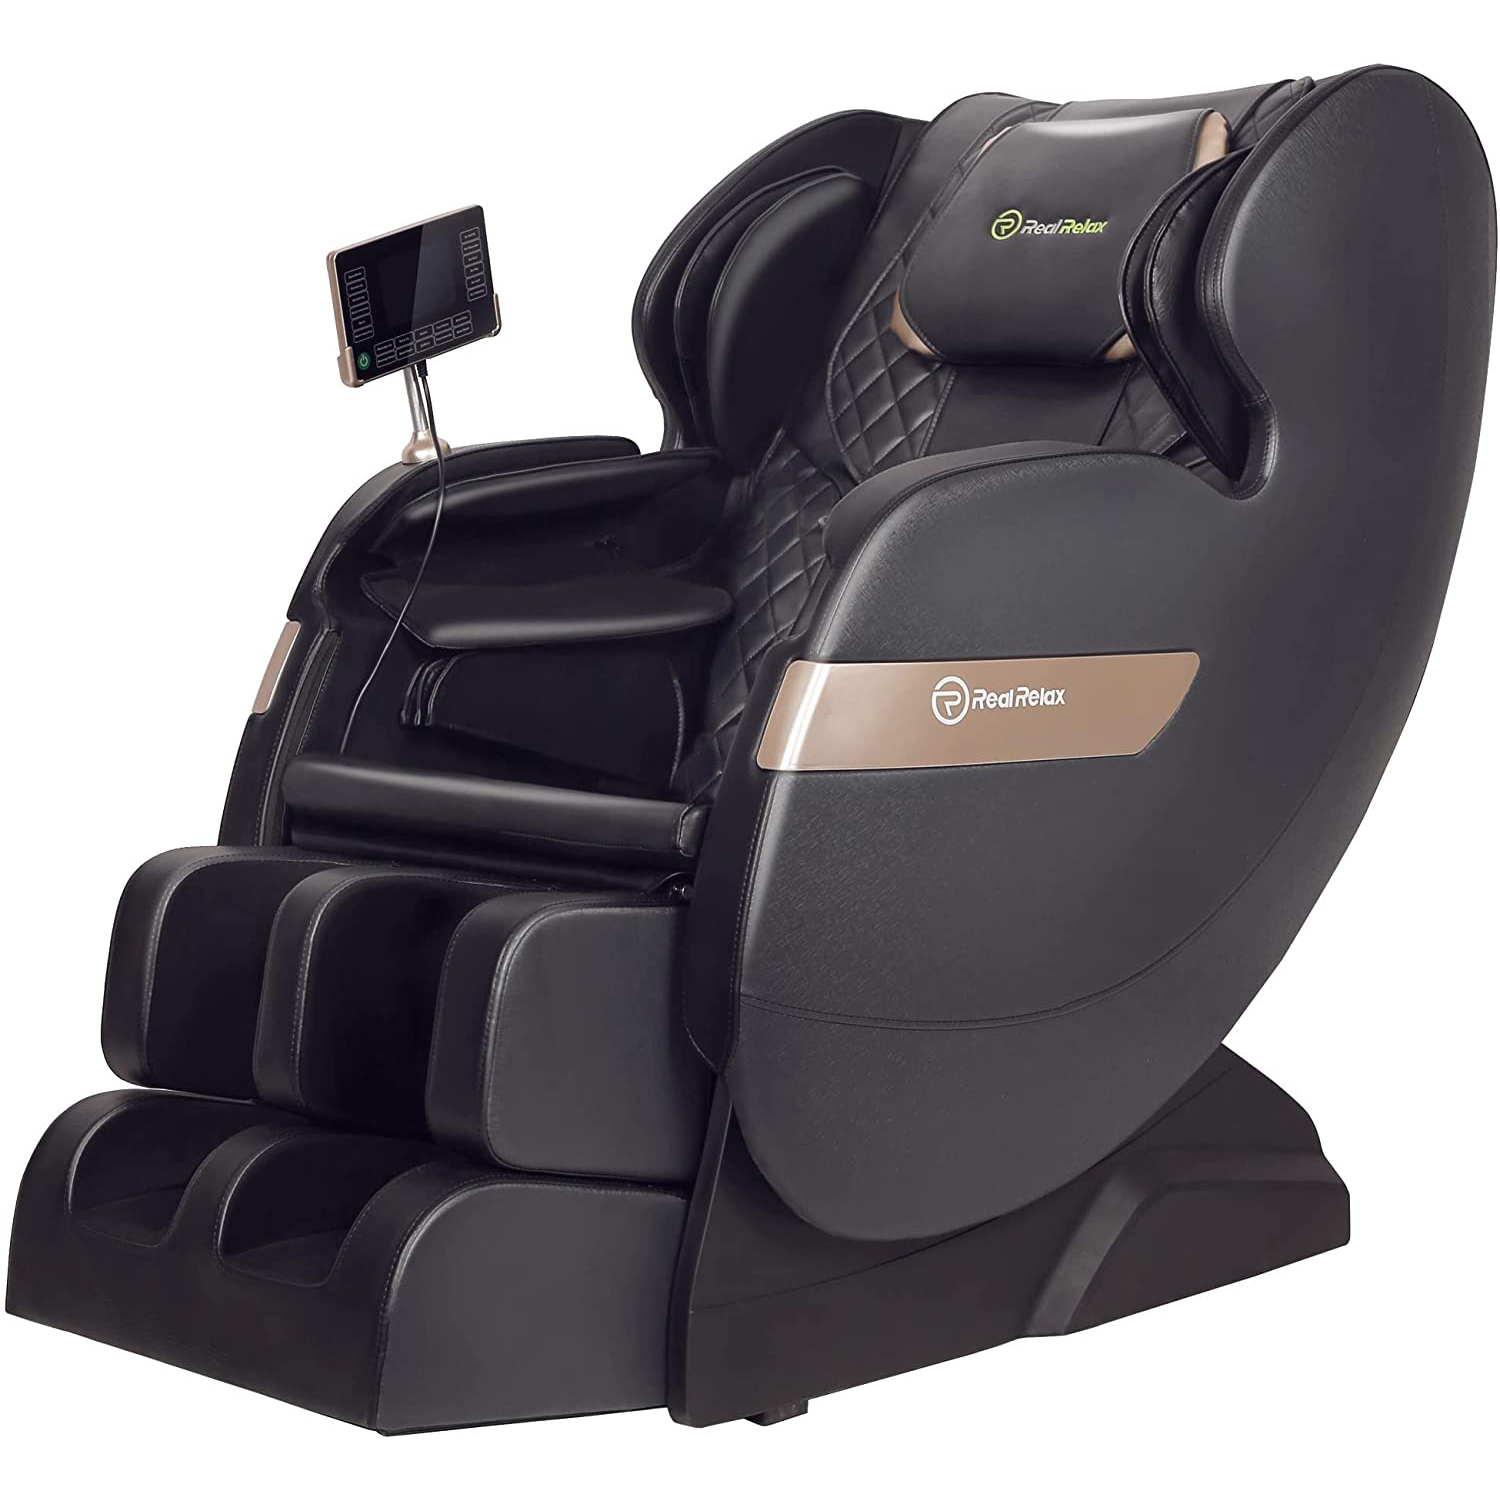 Real Relax S Track Massage Chair, Full Body Zero Gravity Shiatsu Recliner with Smart Voice Controller, Black - image 1 of 11